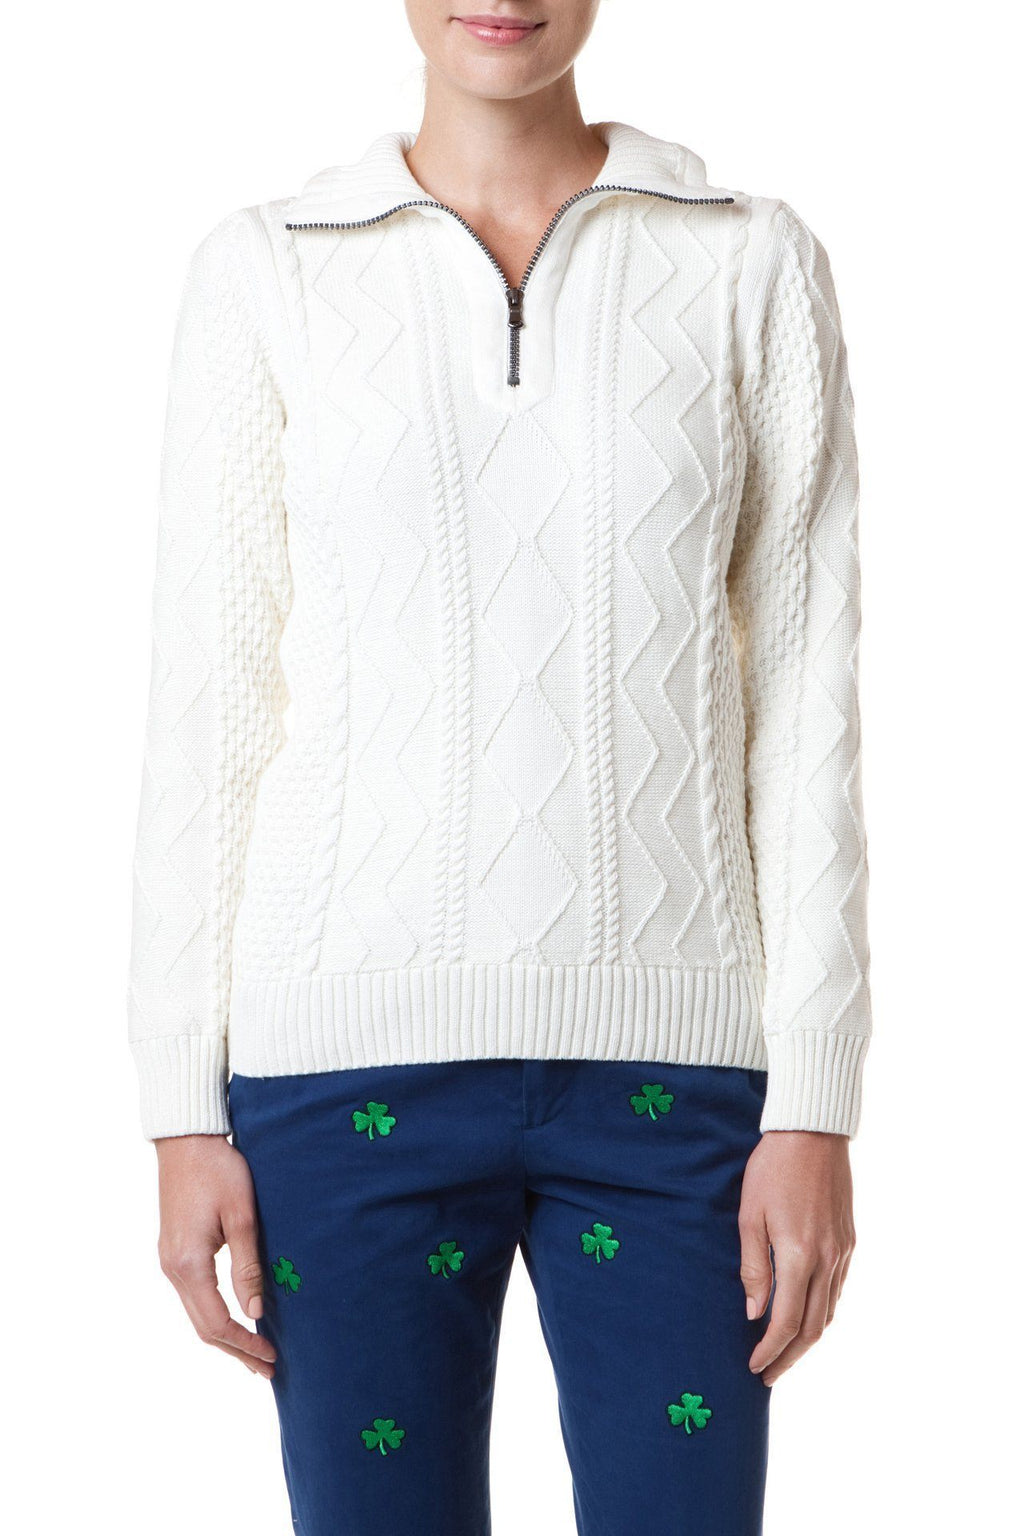 Holebrook Sweater Amy Off White WP 1/4 Zip - ARCHIVED - Castaway Nantucket Island